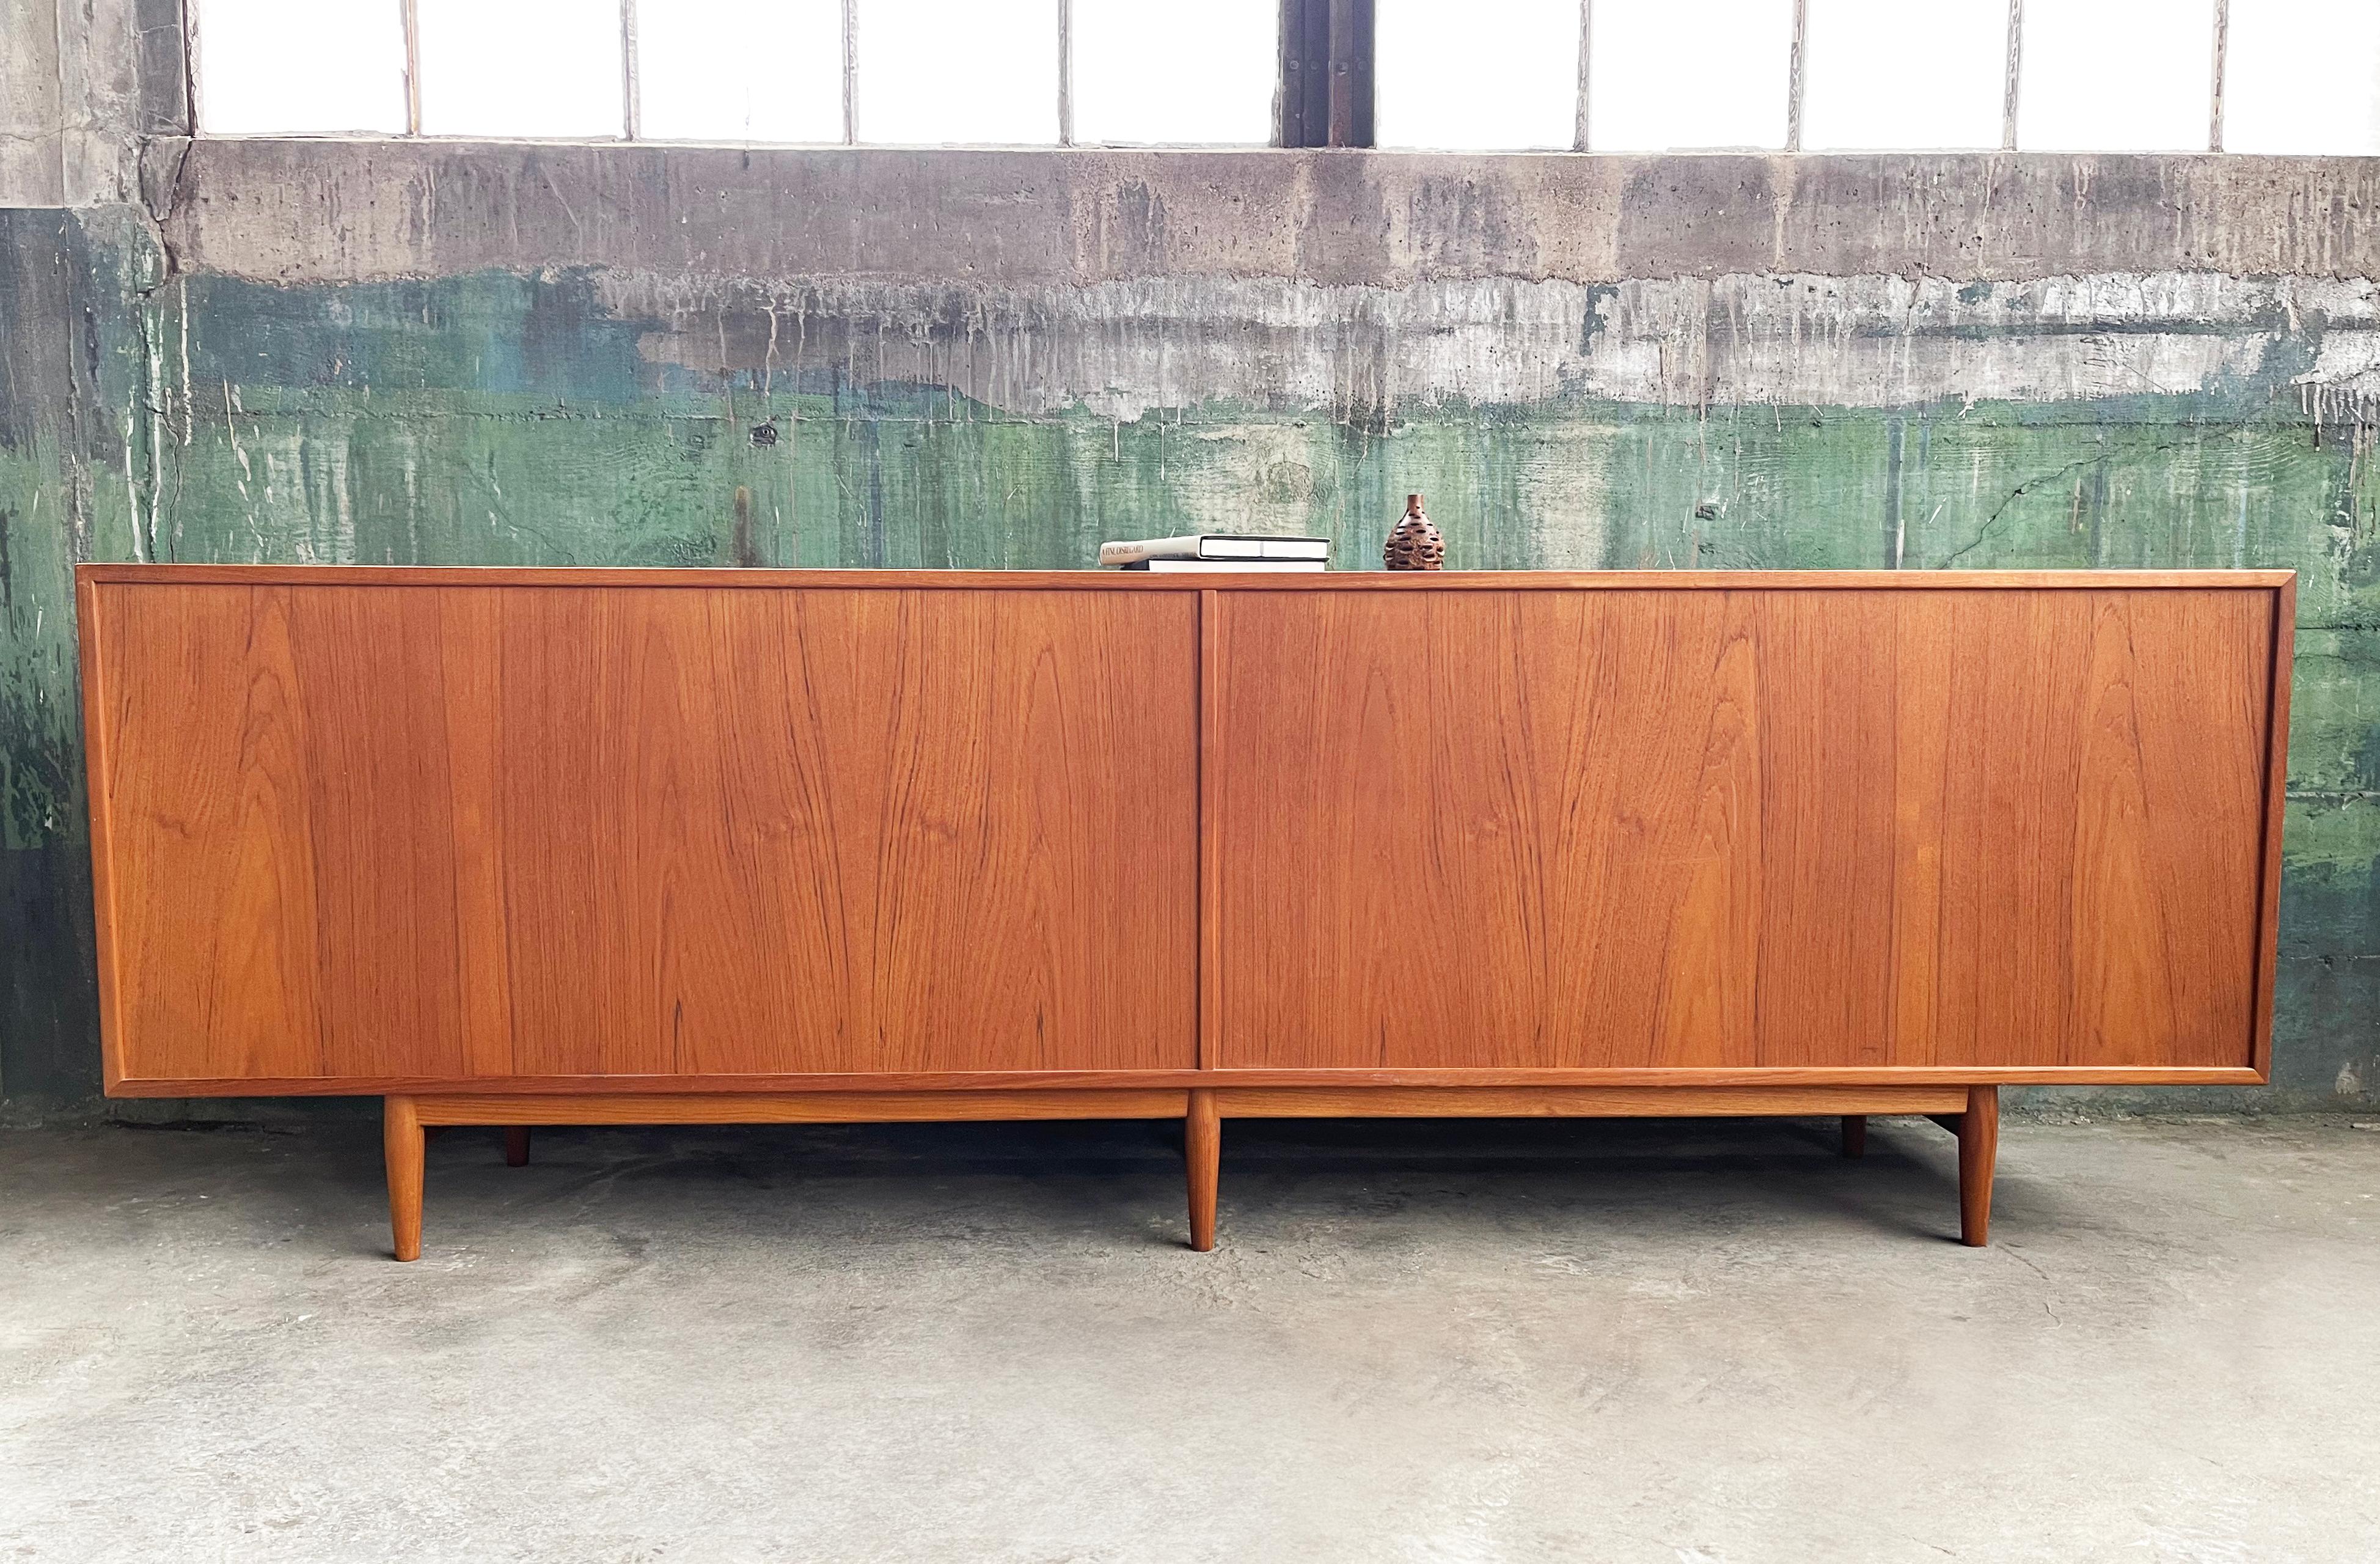 Arne Vodder Sideboard Credenza Model 29a, Produced by Sibast, 1950s Denmark In Good Condition For Sale In Madison, WI